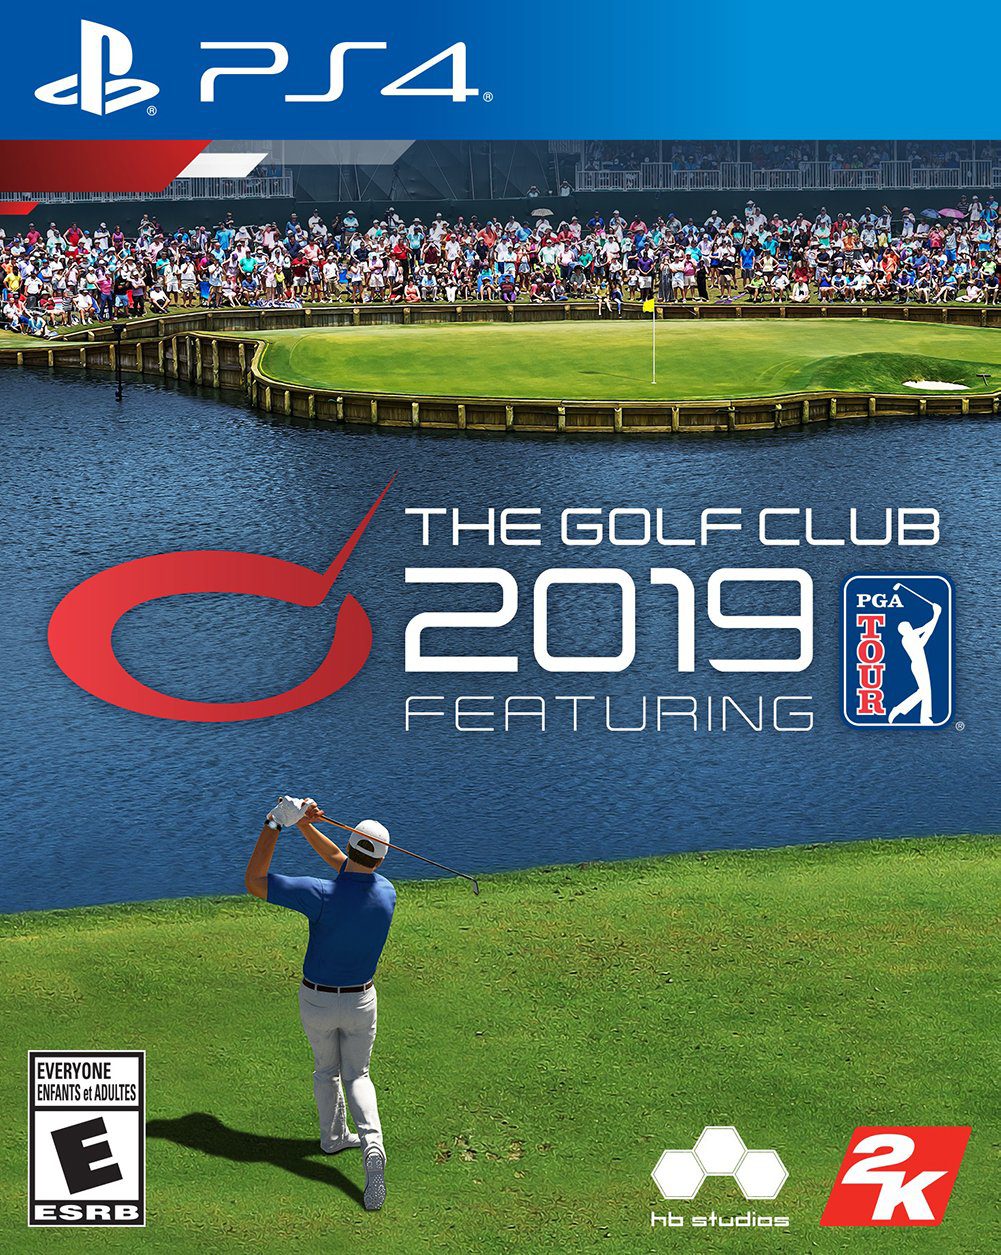 The Golf Club 2019 Featuring PGA Tour for PS4